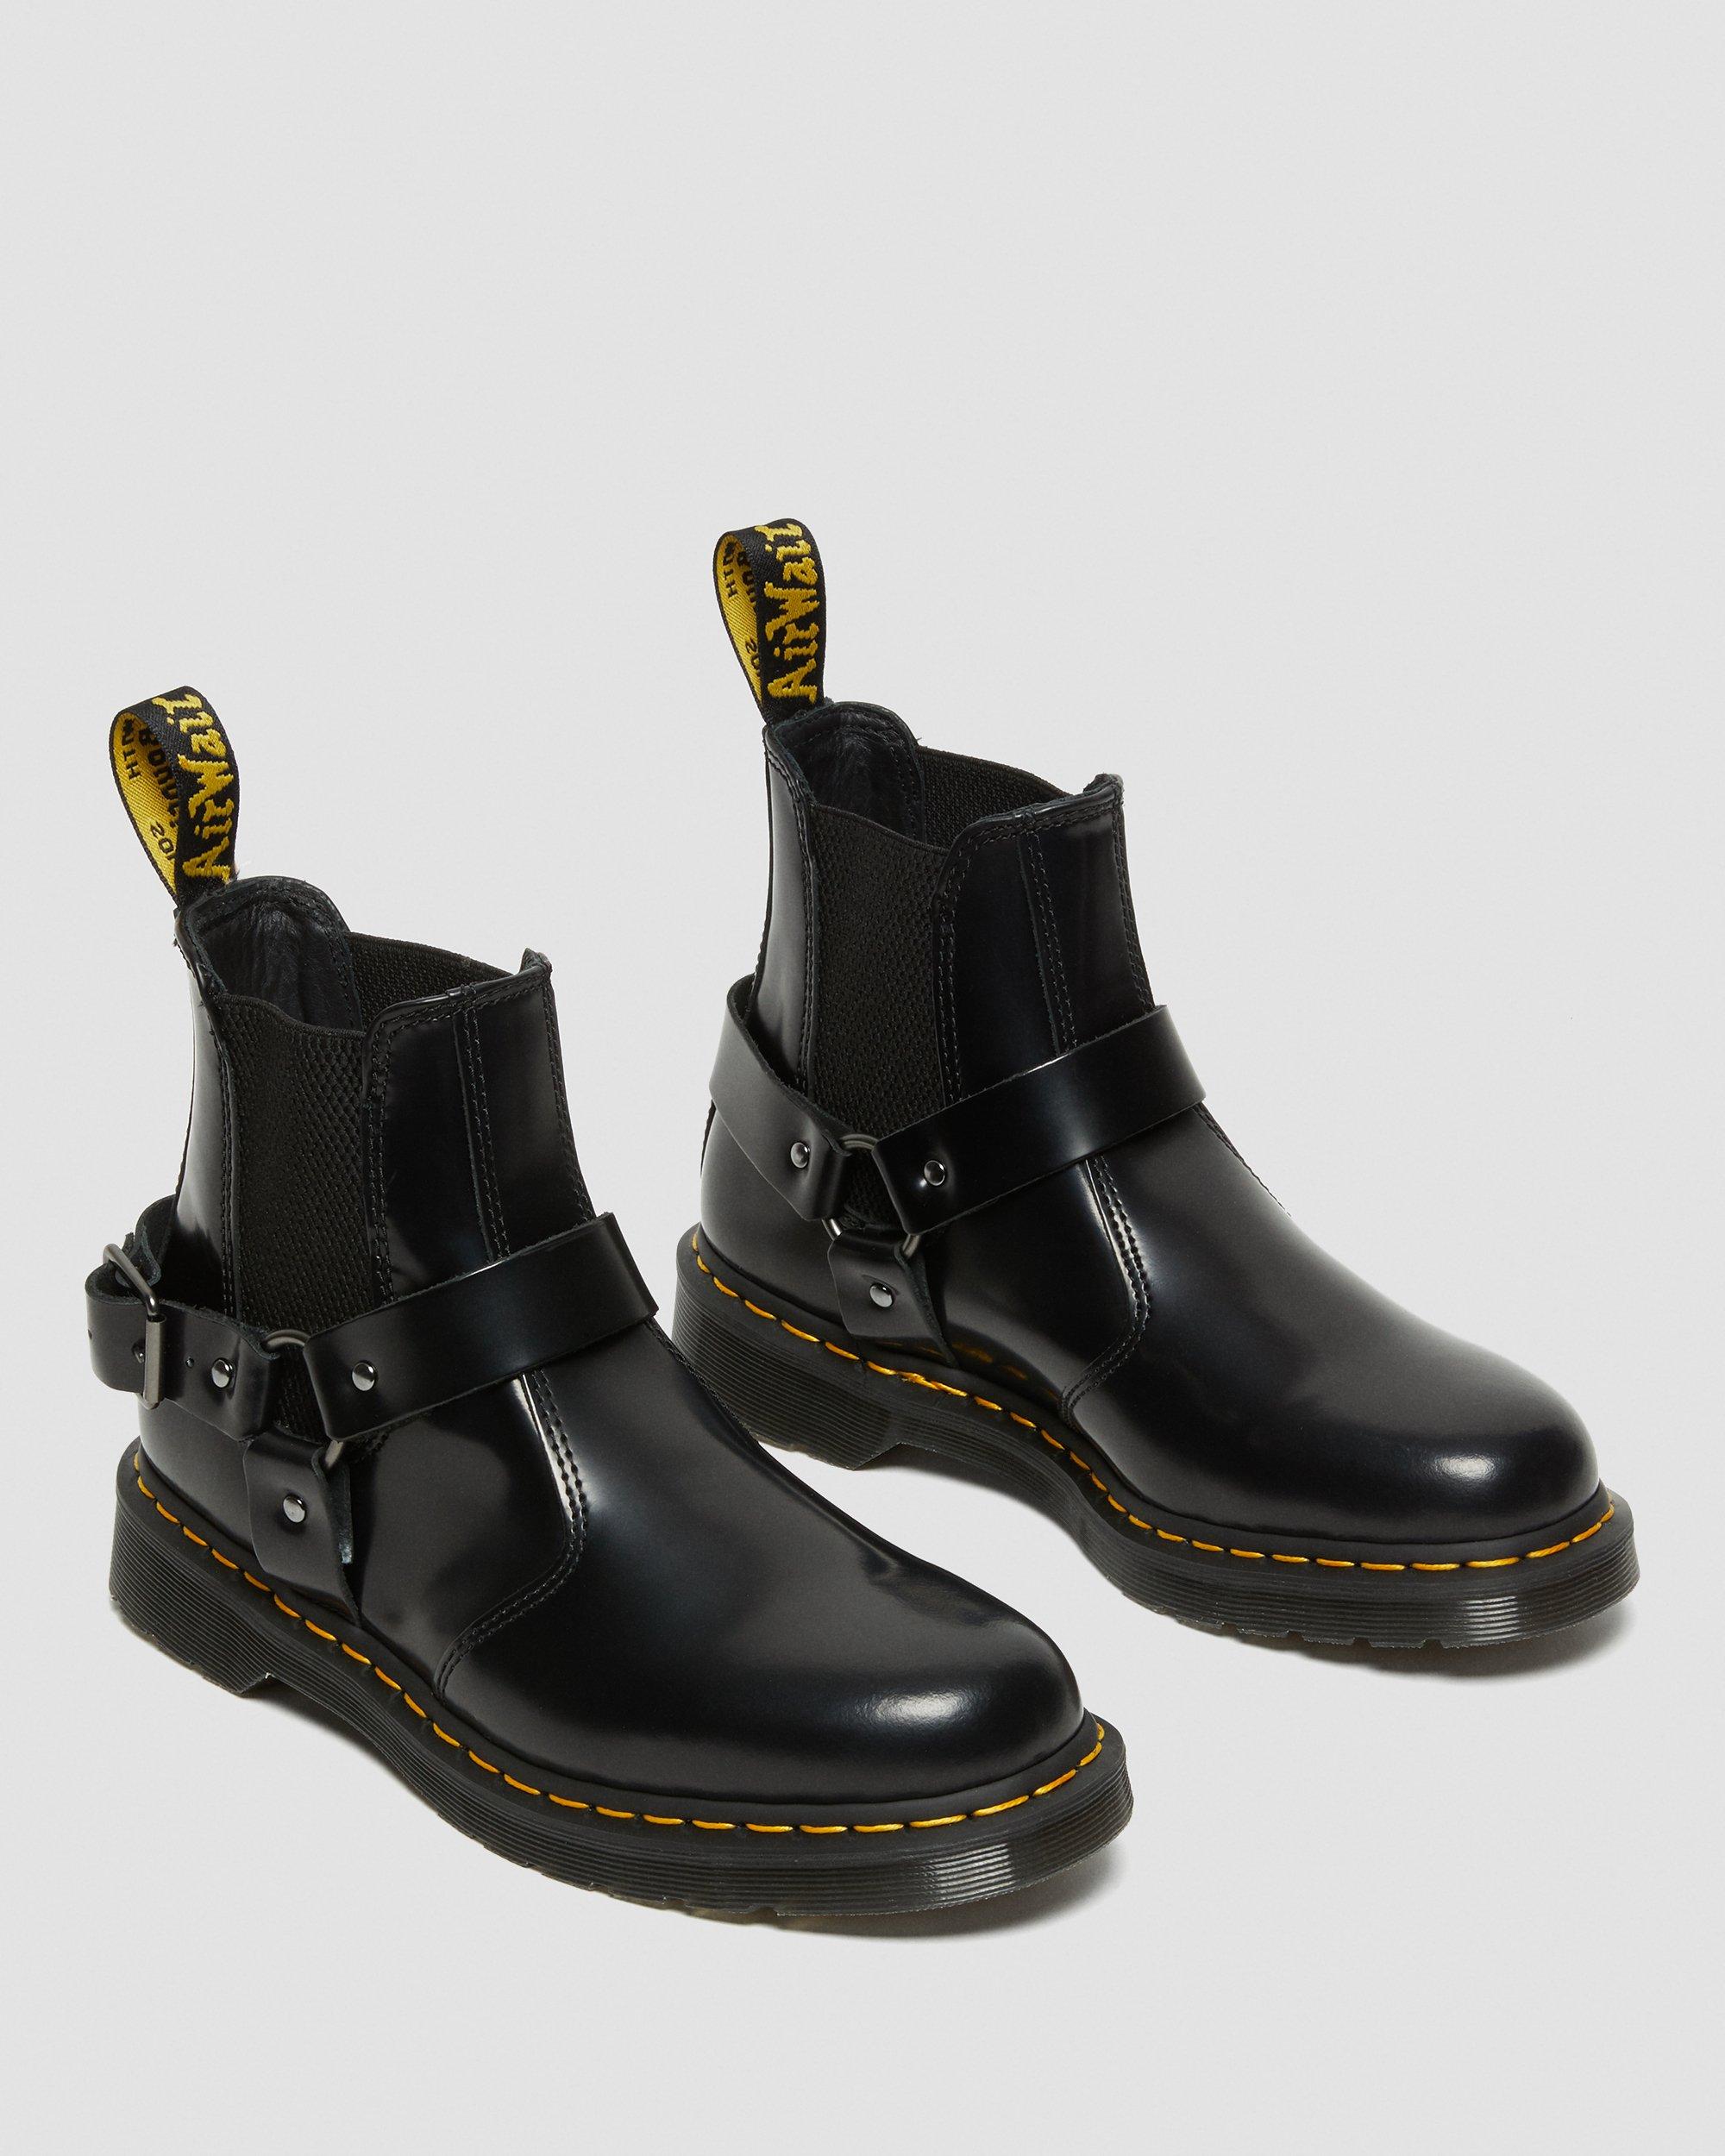 WINCOX BLACKWINCOX LEATHER CHELSEA BOOTS Dr. Martens